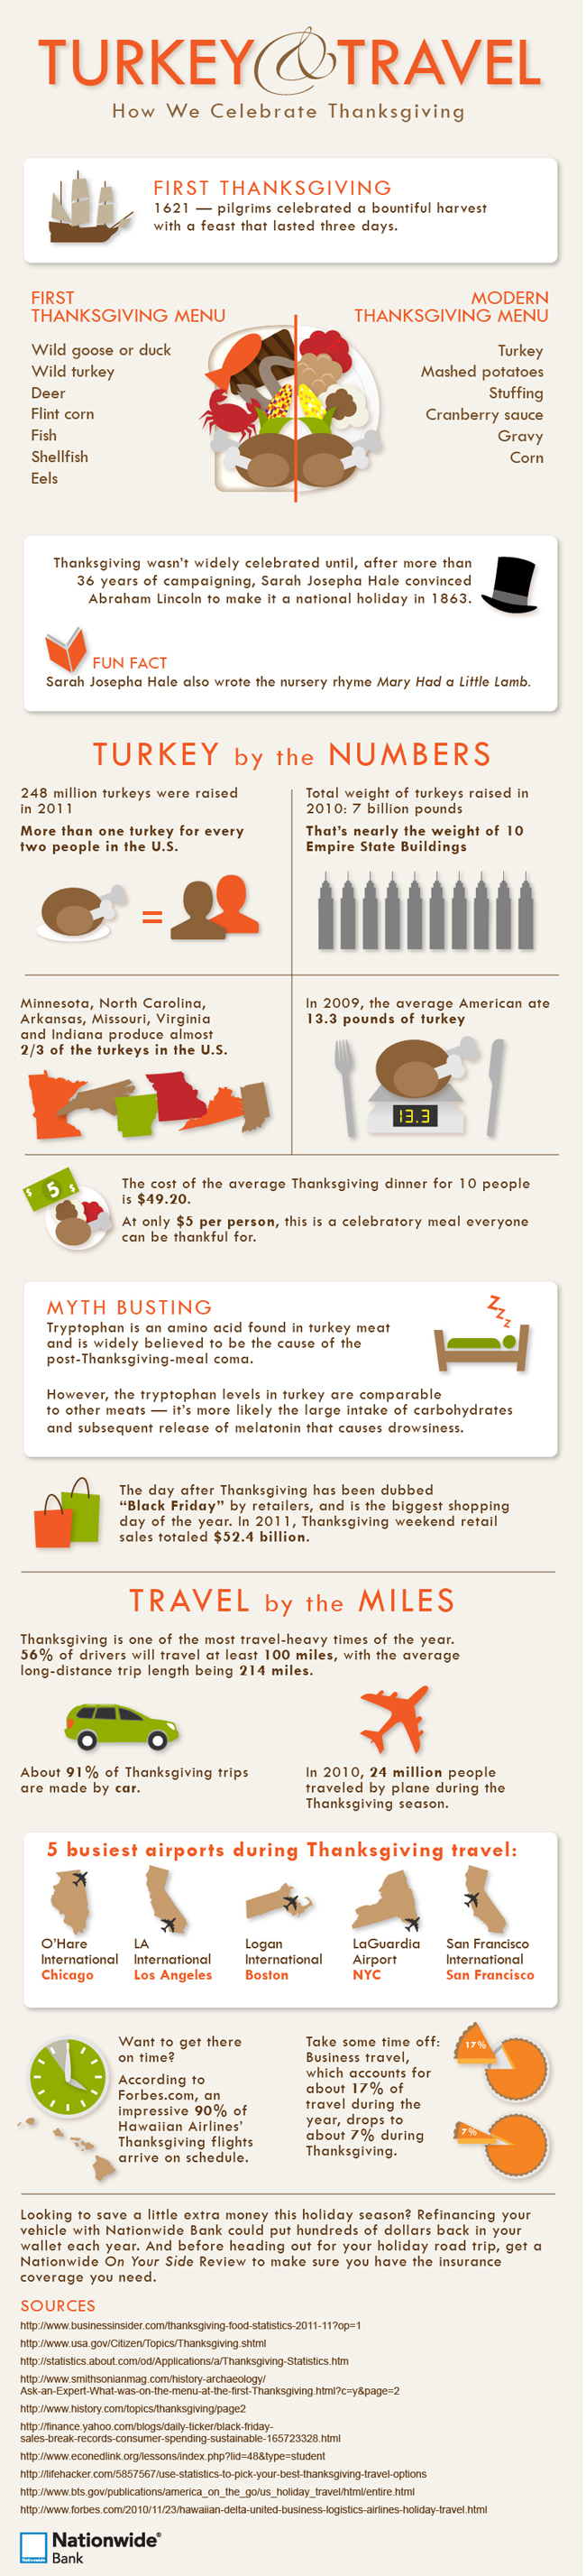 Thanksgiving Facts and Statistics